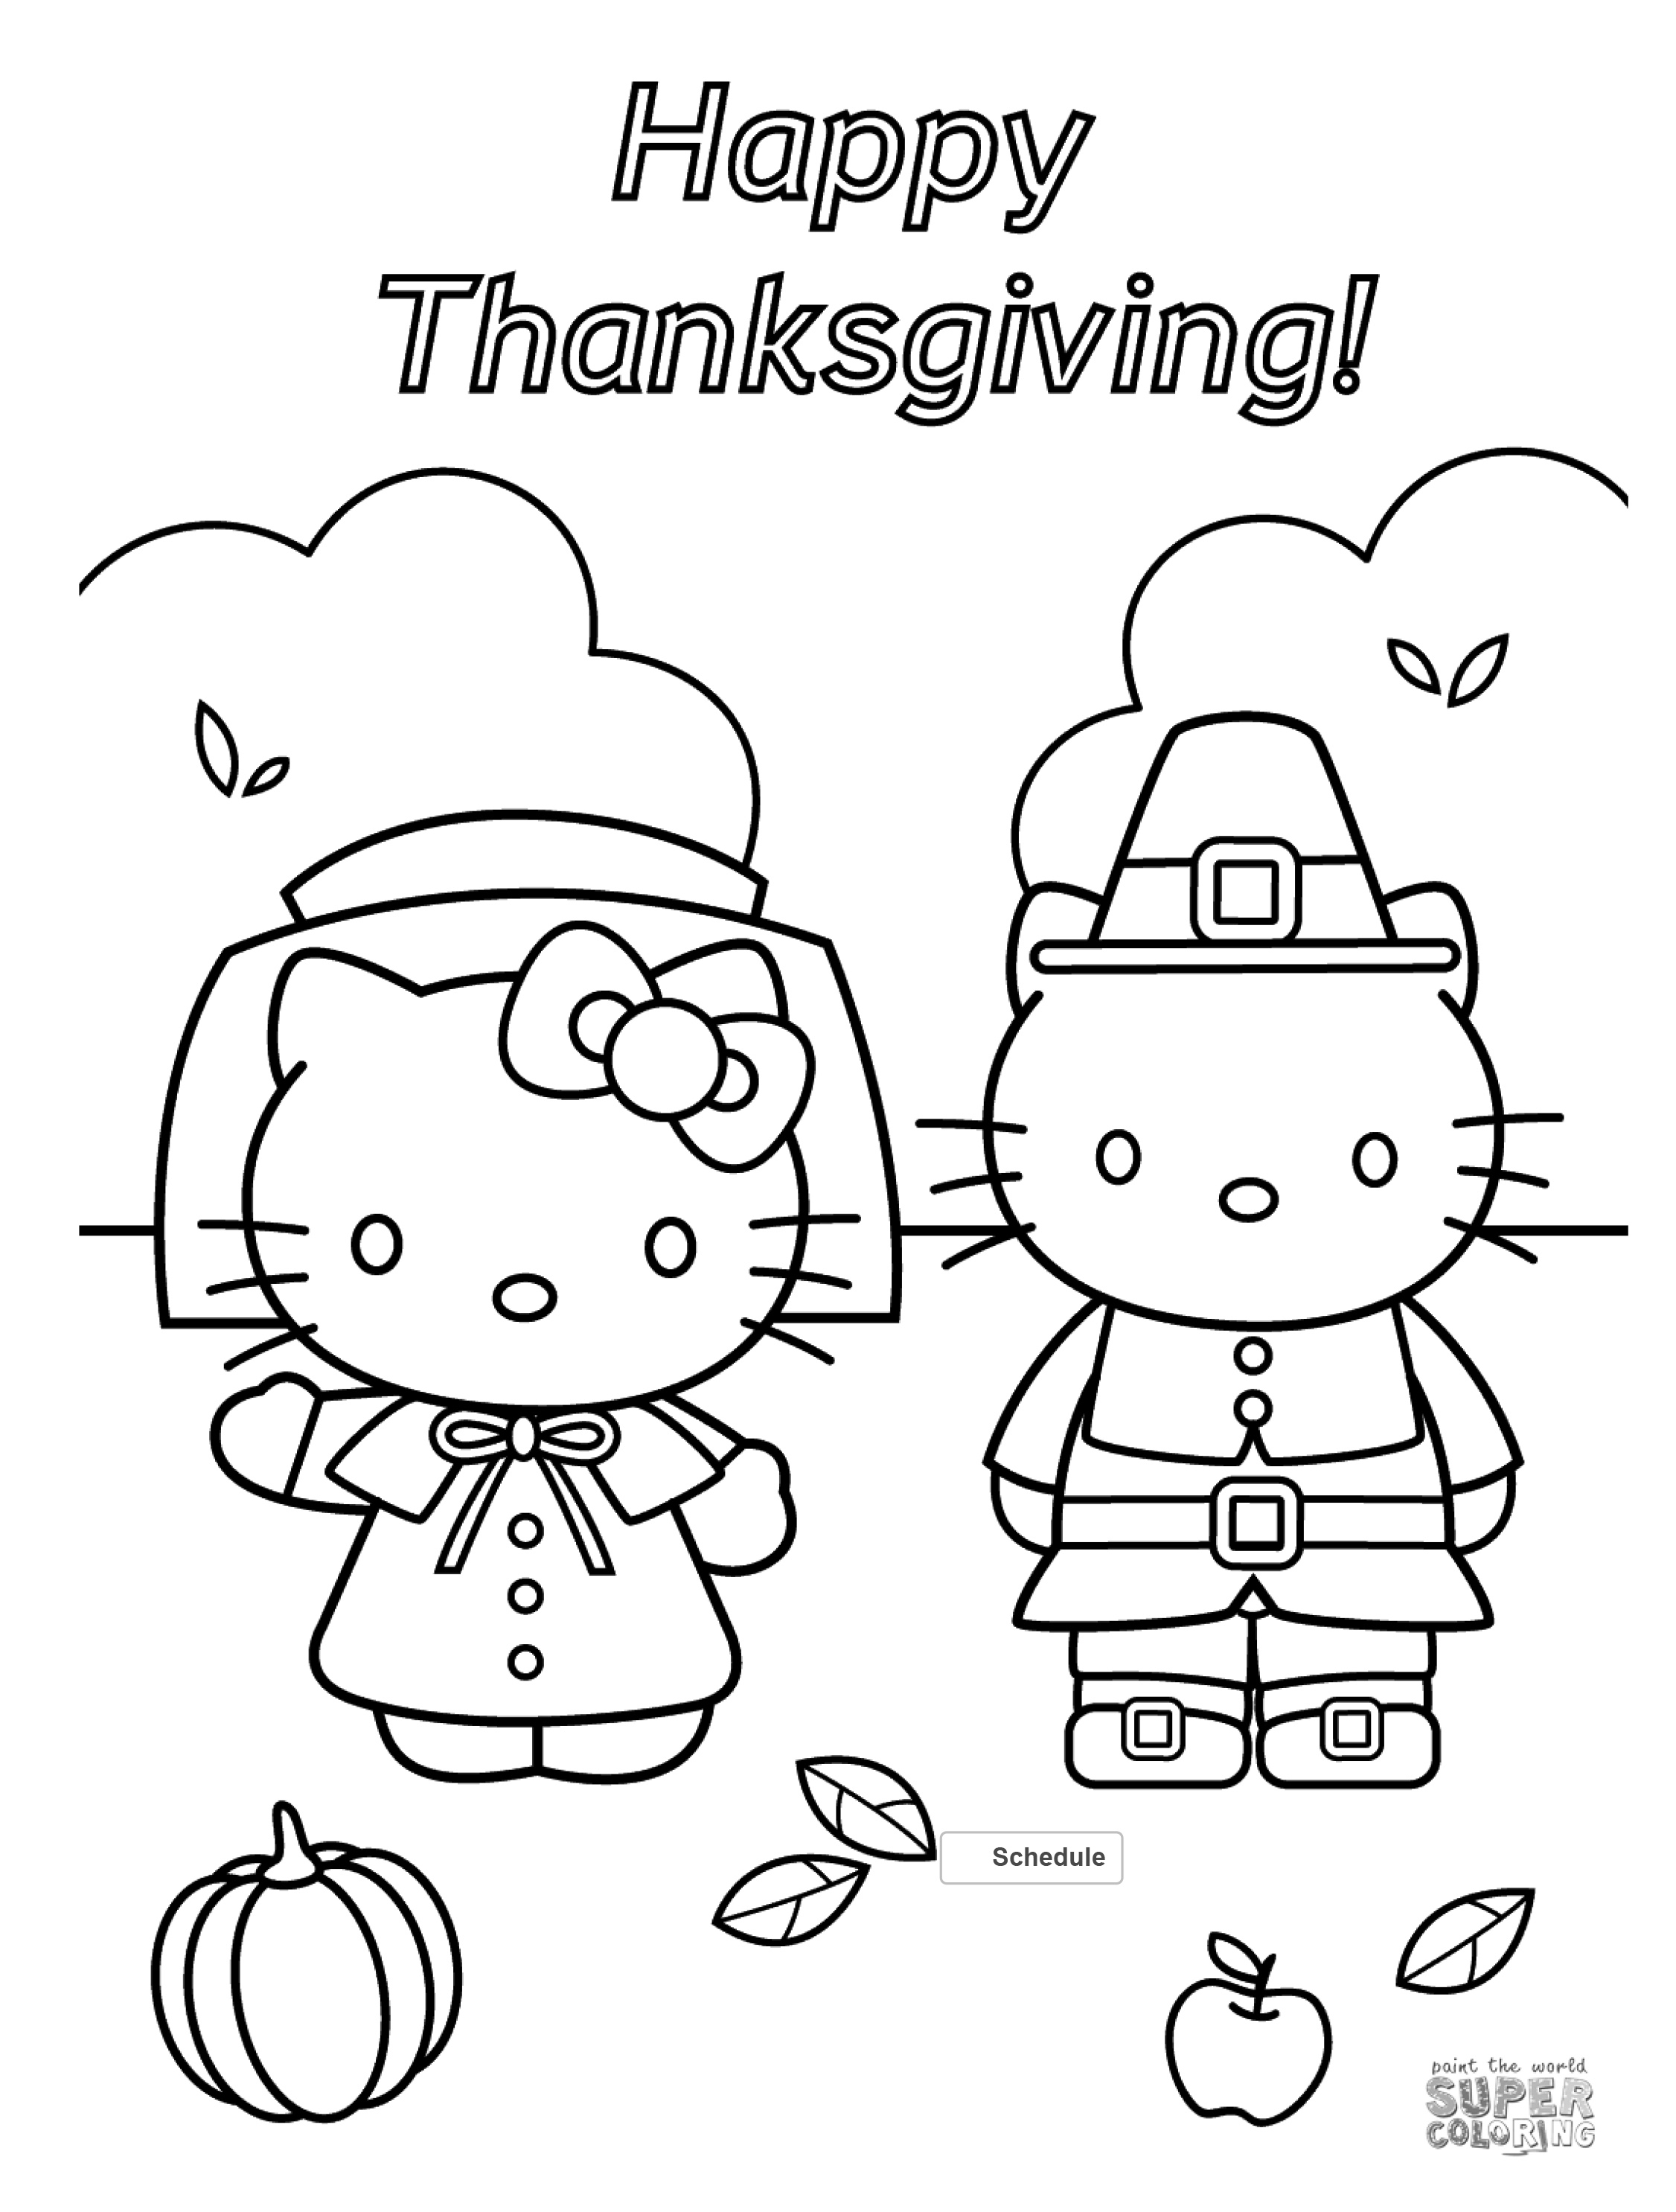 Free Thanksgiving Coloring Pages For Adults &amp;amp; Kids - Happiness Is - Free Printable Thanksgiving Coloring Pages